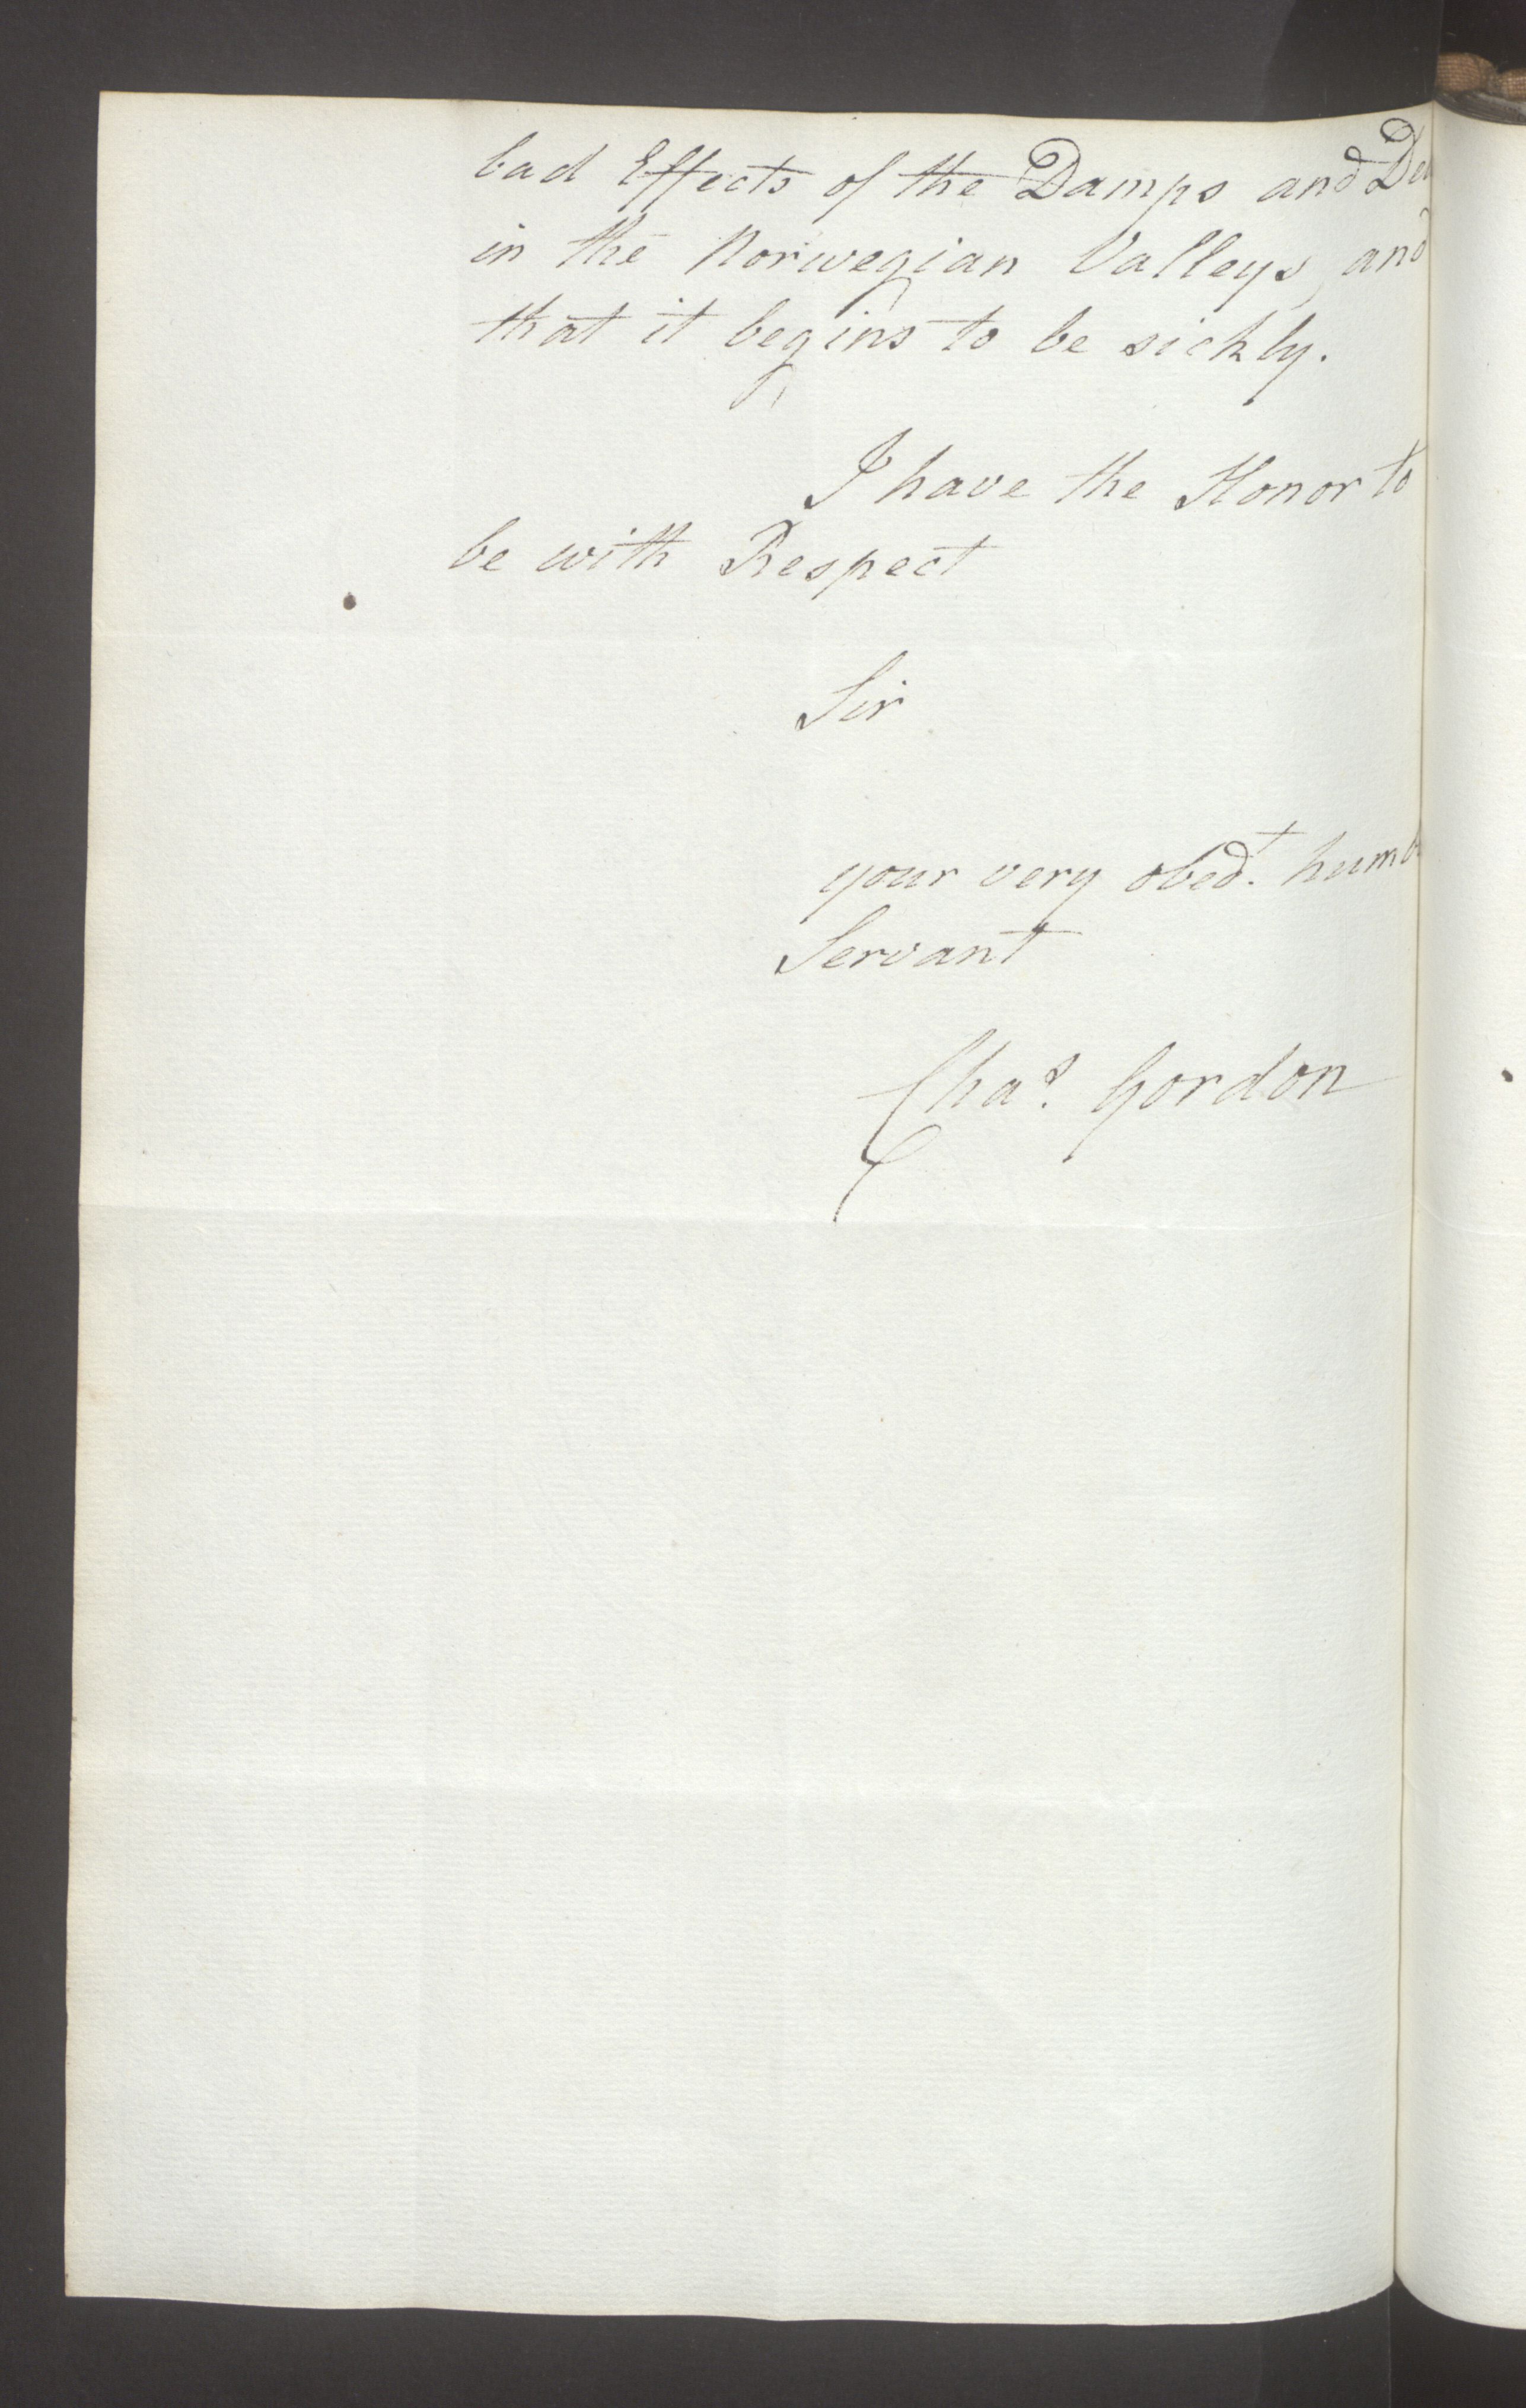 Foreign Office*, UKA/-/FO 38/16: Sir C. Gordon. Reports from Malmö, Jonkoping, and Helsingborg, 1814, s. 84